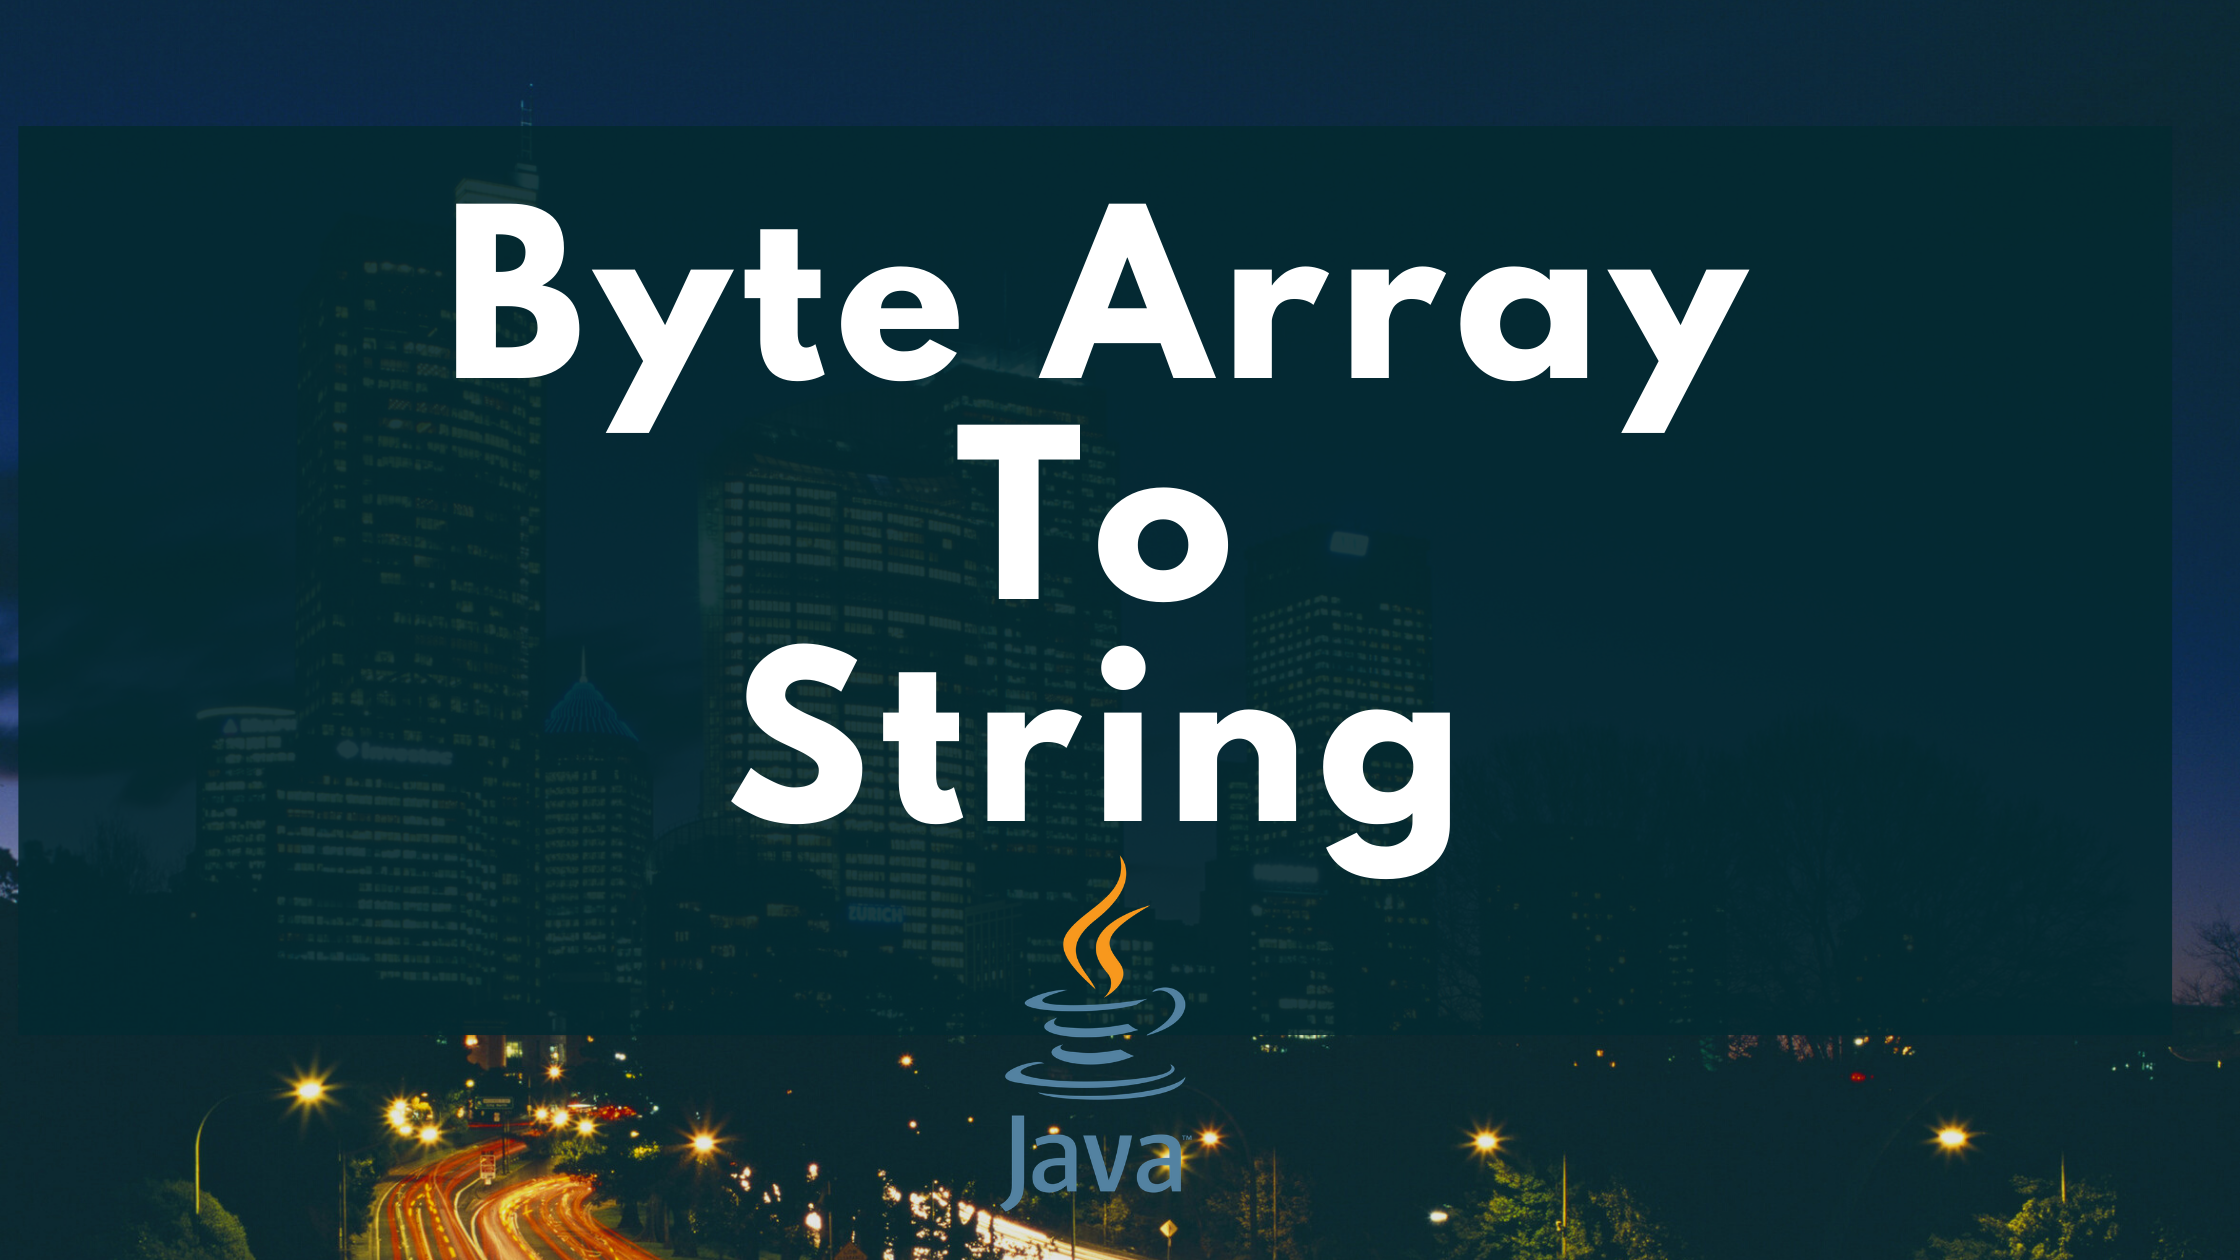 Byte Array to String in Java